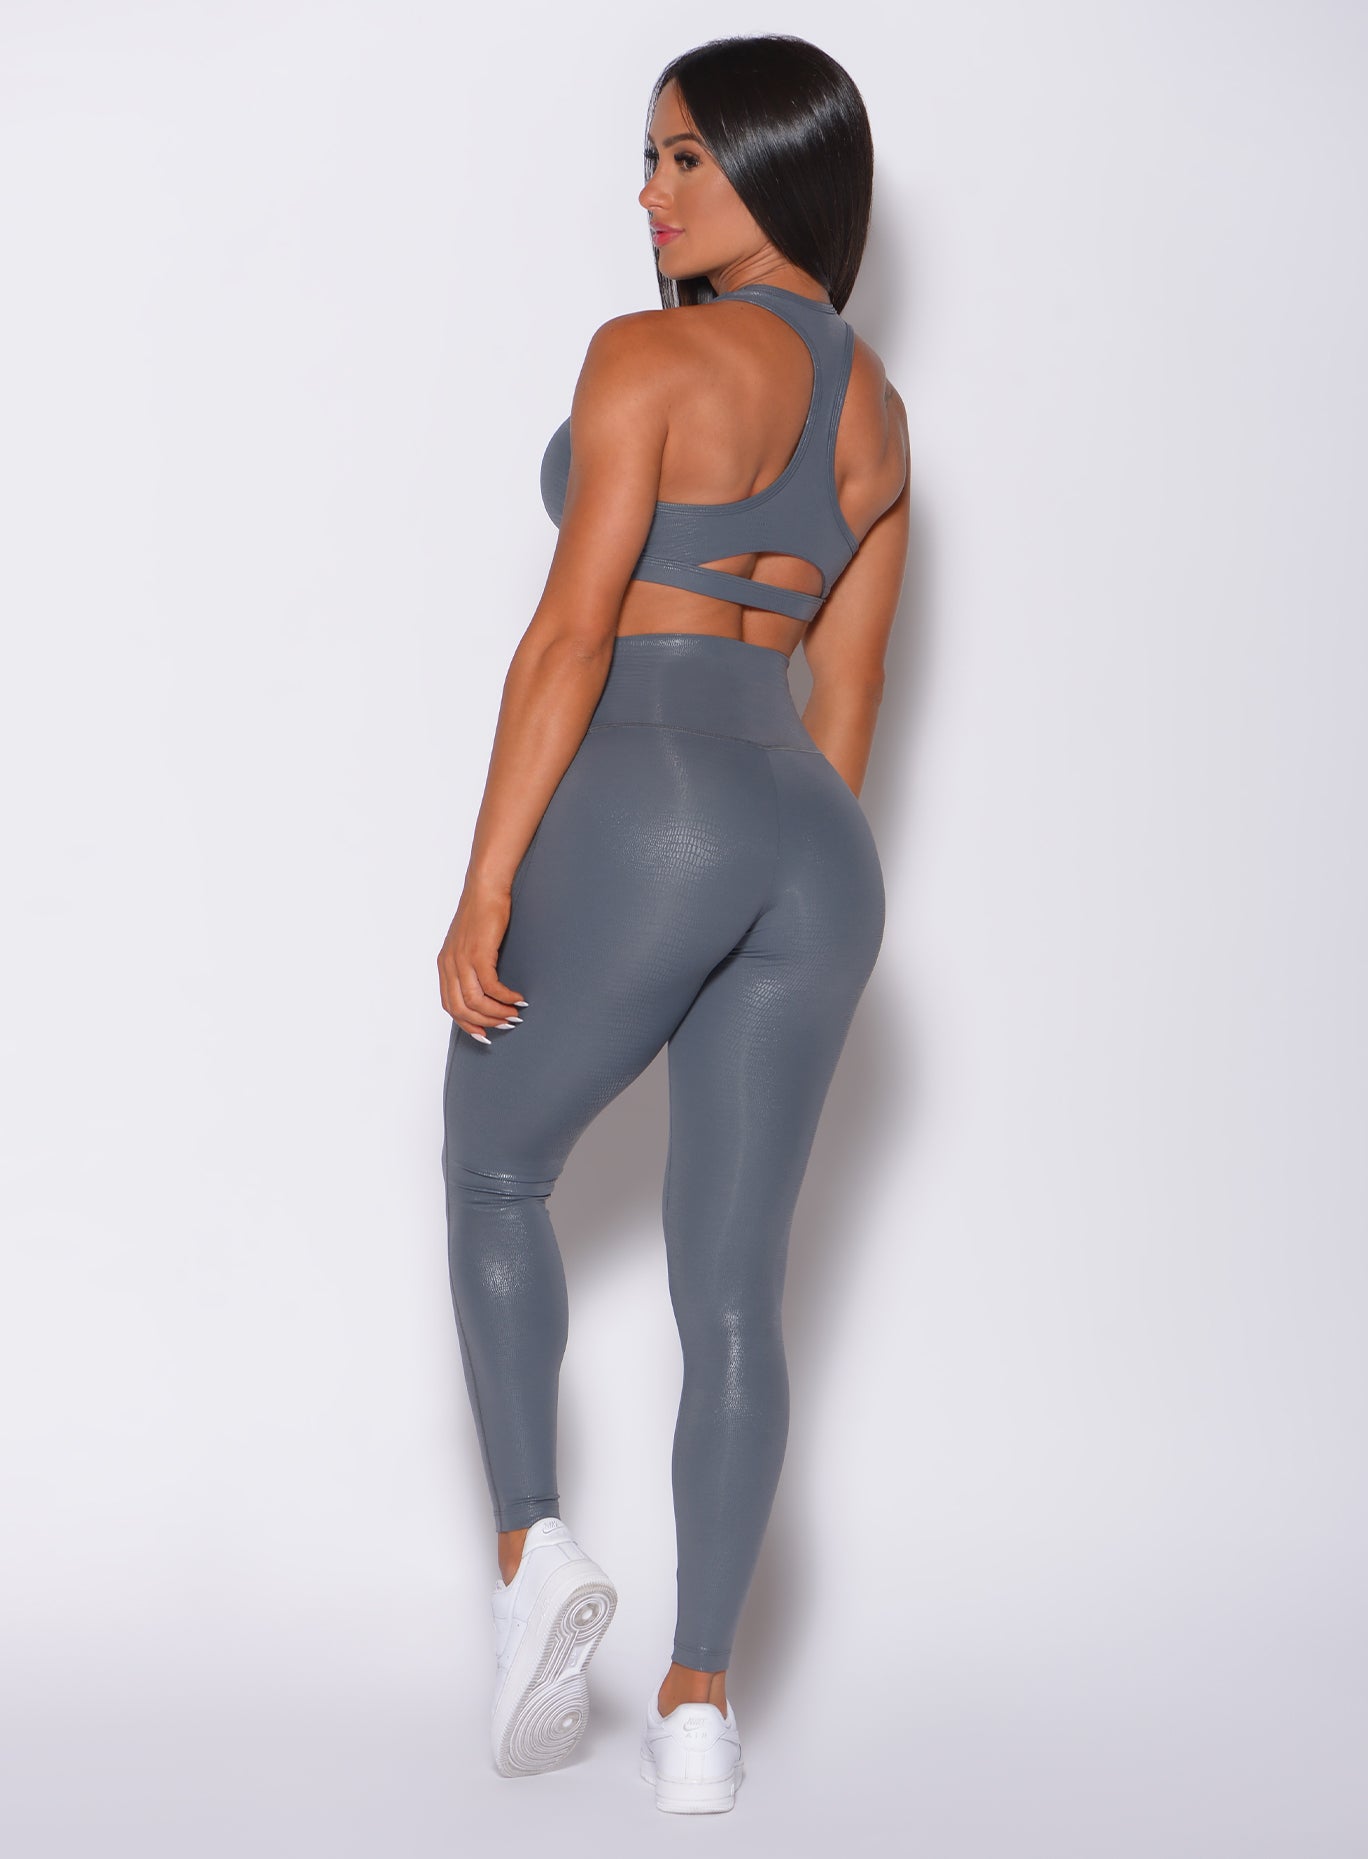 Back profile picture of a model wearing our shine sports bra in gray python color and a matching leggings